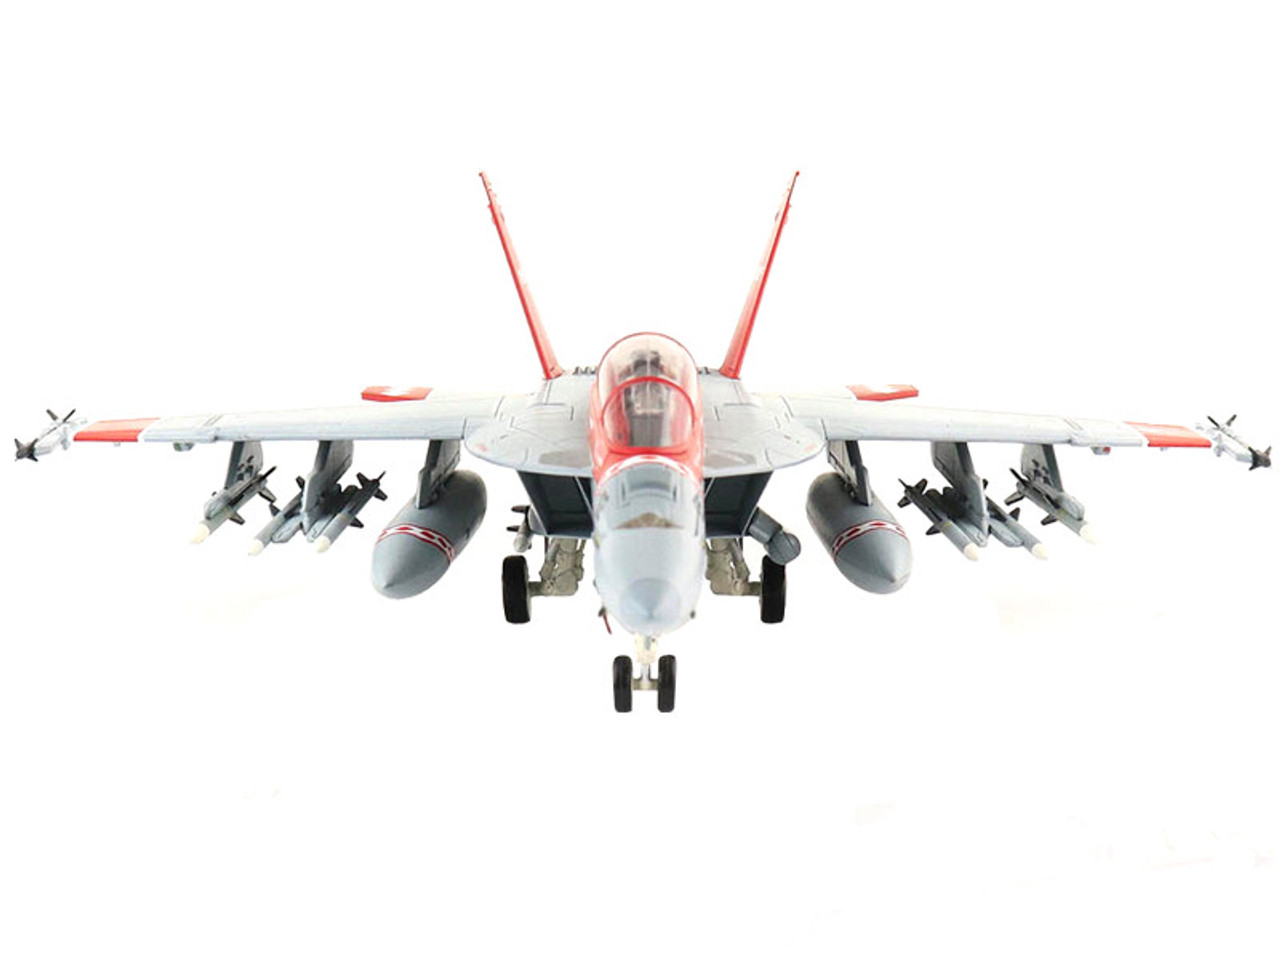 Boeing F/A-18F Super Hornet Fighter Aircraft "VF-102 United States Navy Atsugi Air Base" (2005) "Air Power Series" 1/72 Diecast Model by Hobby Master